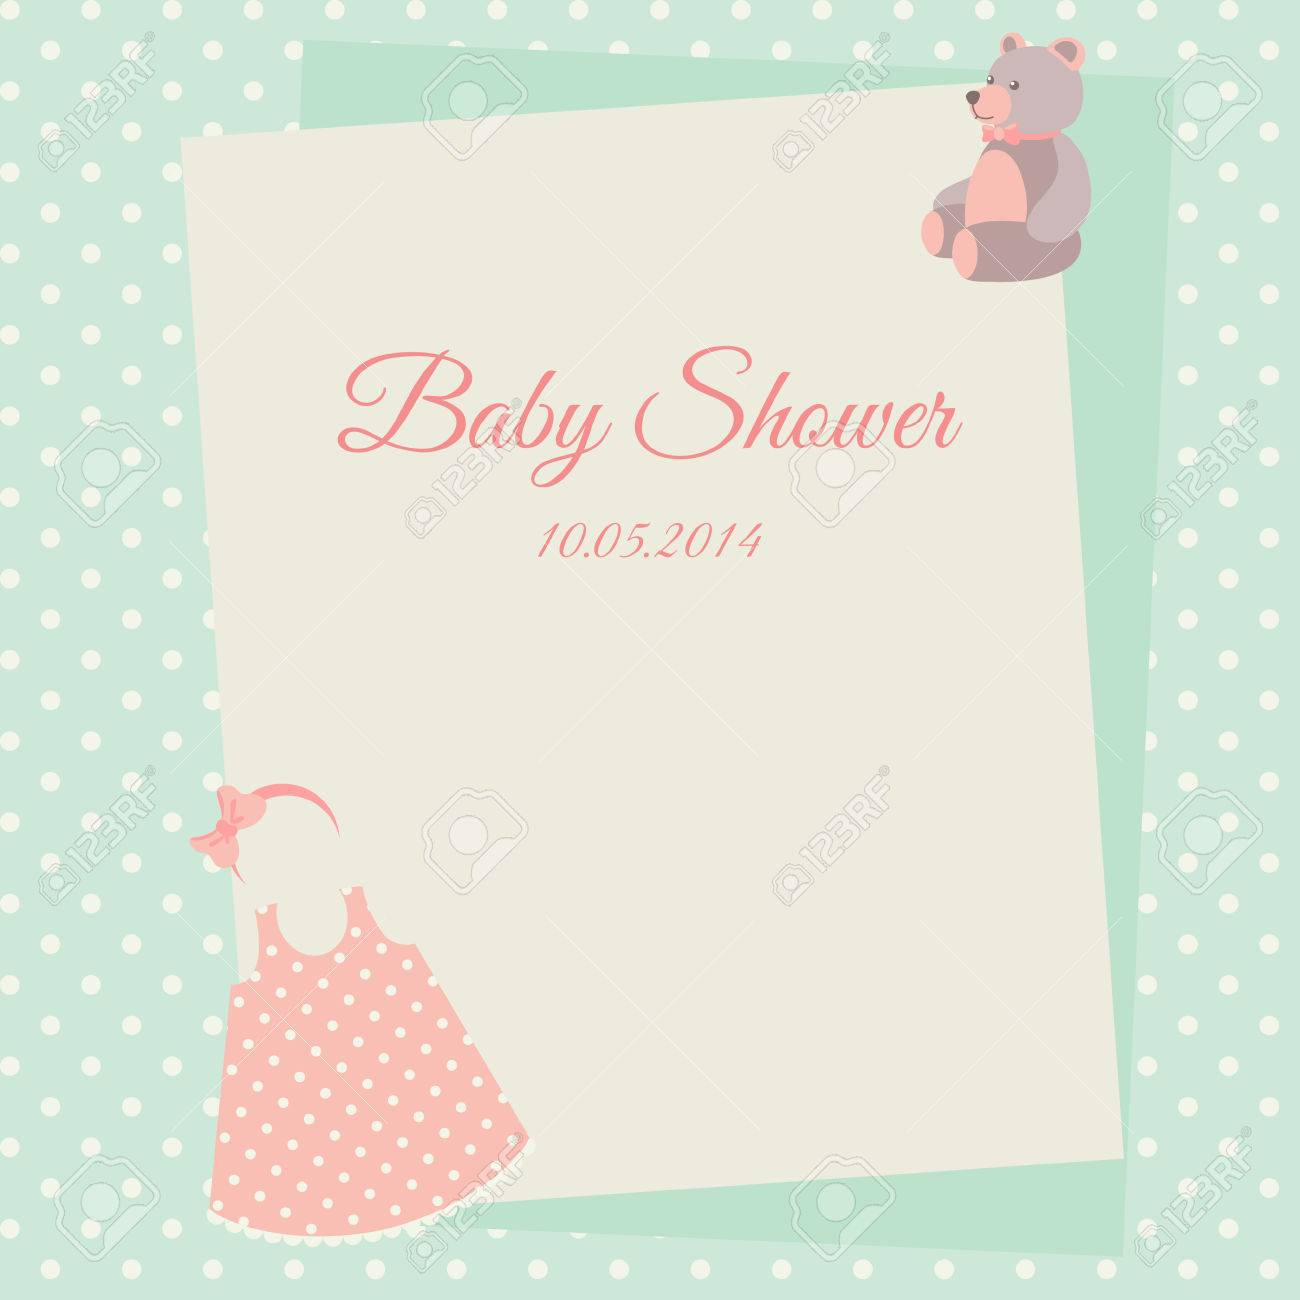 Baby shower invitation card template with dress and teddy bear With Regard To Baby Shower Invitation Flyer Template Pertaining To Baby Shower Invitation Flyer Template